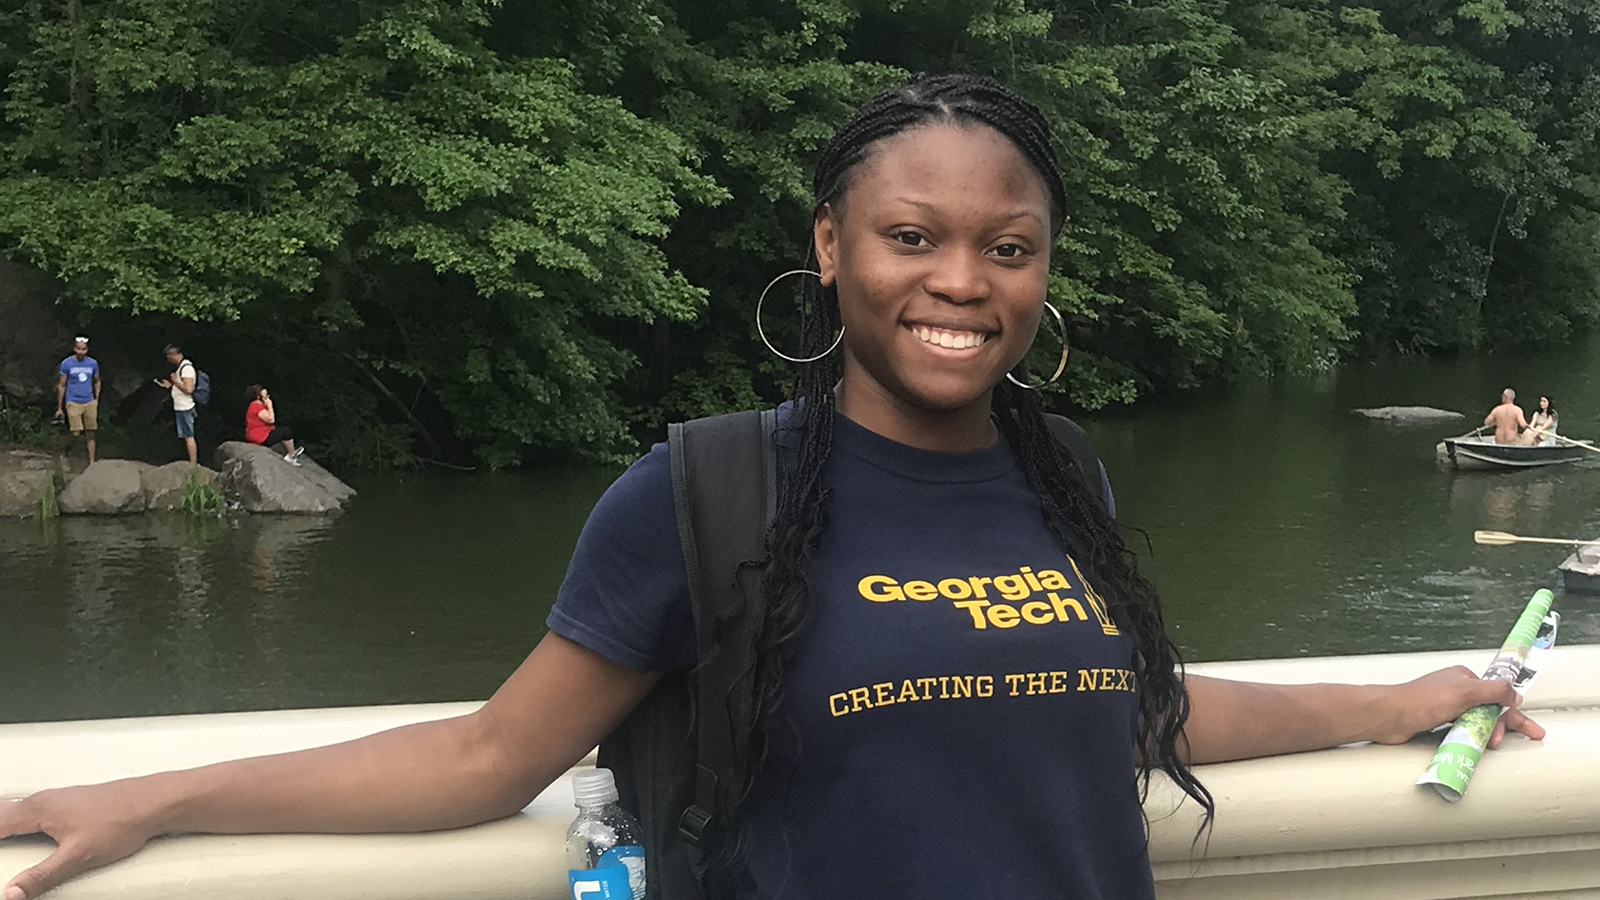 Breanna Ivey wears a Georgia Tech T-Shirt and poses in front of a river with her arms outstretched on concrete railing.